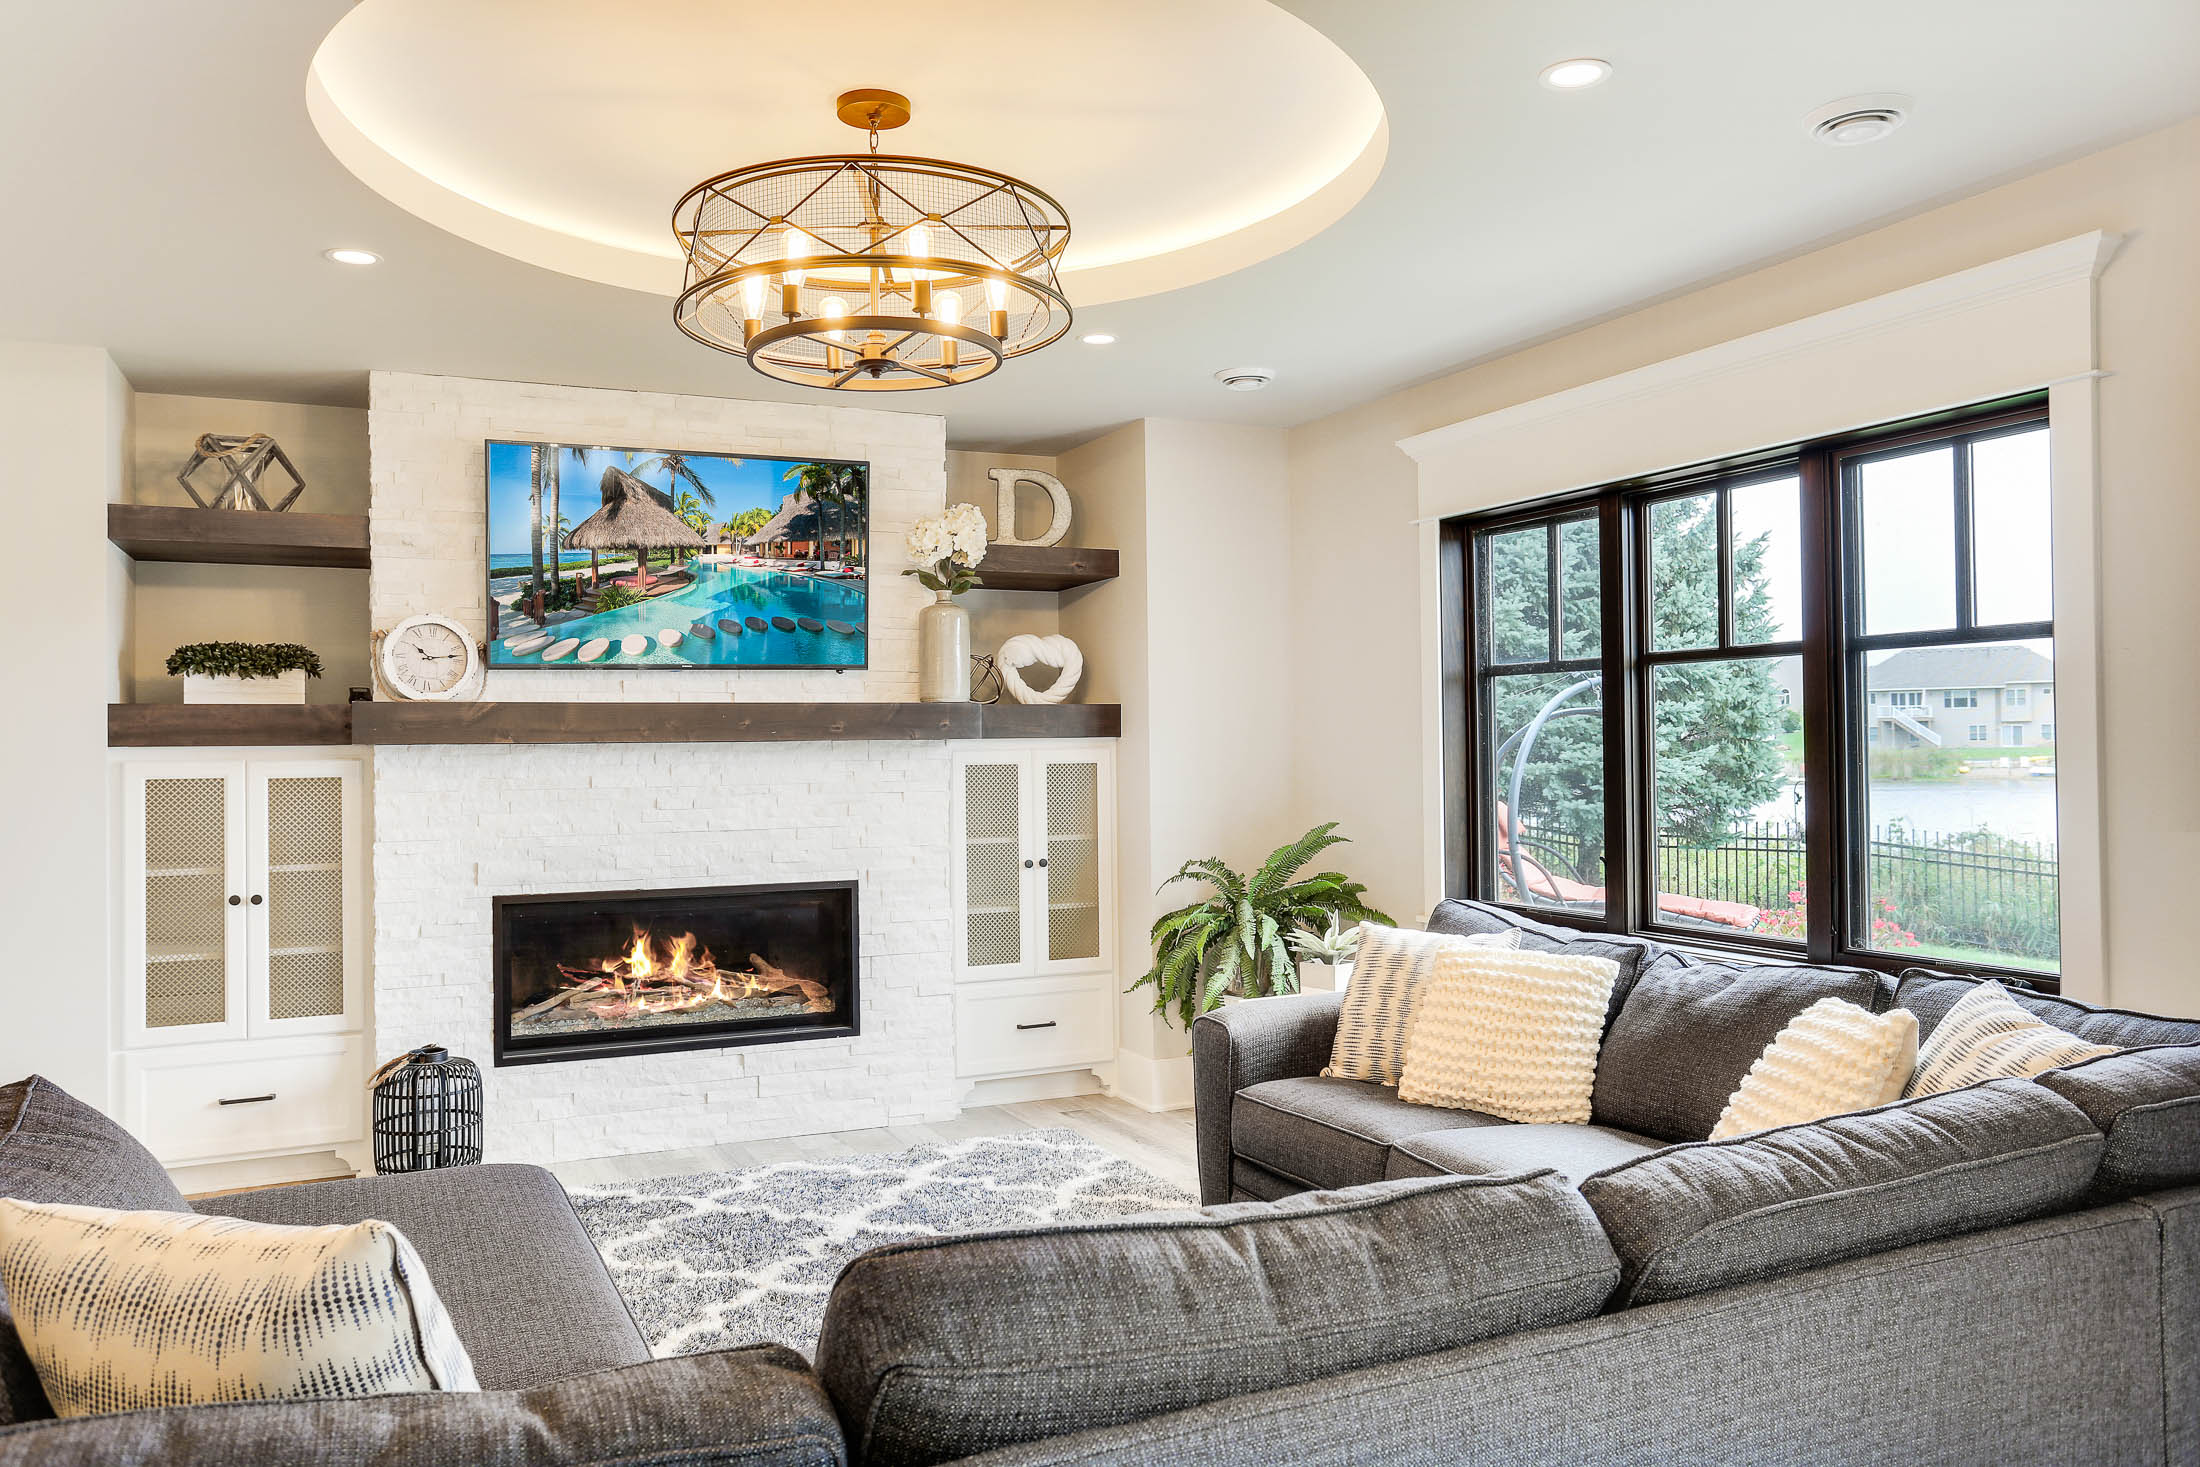 Relax by fireplace and enjoy lake views